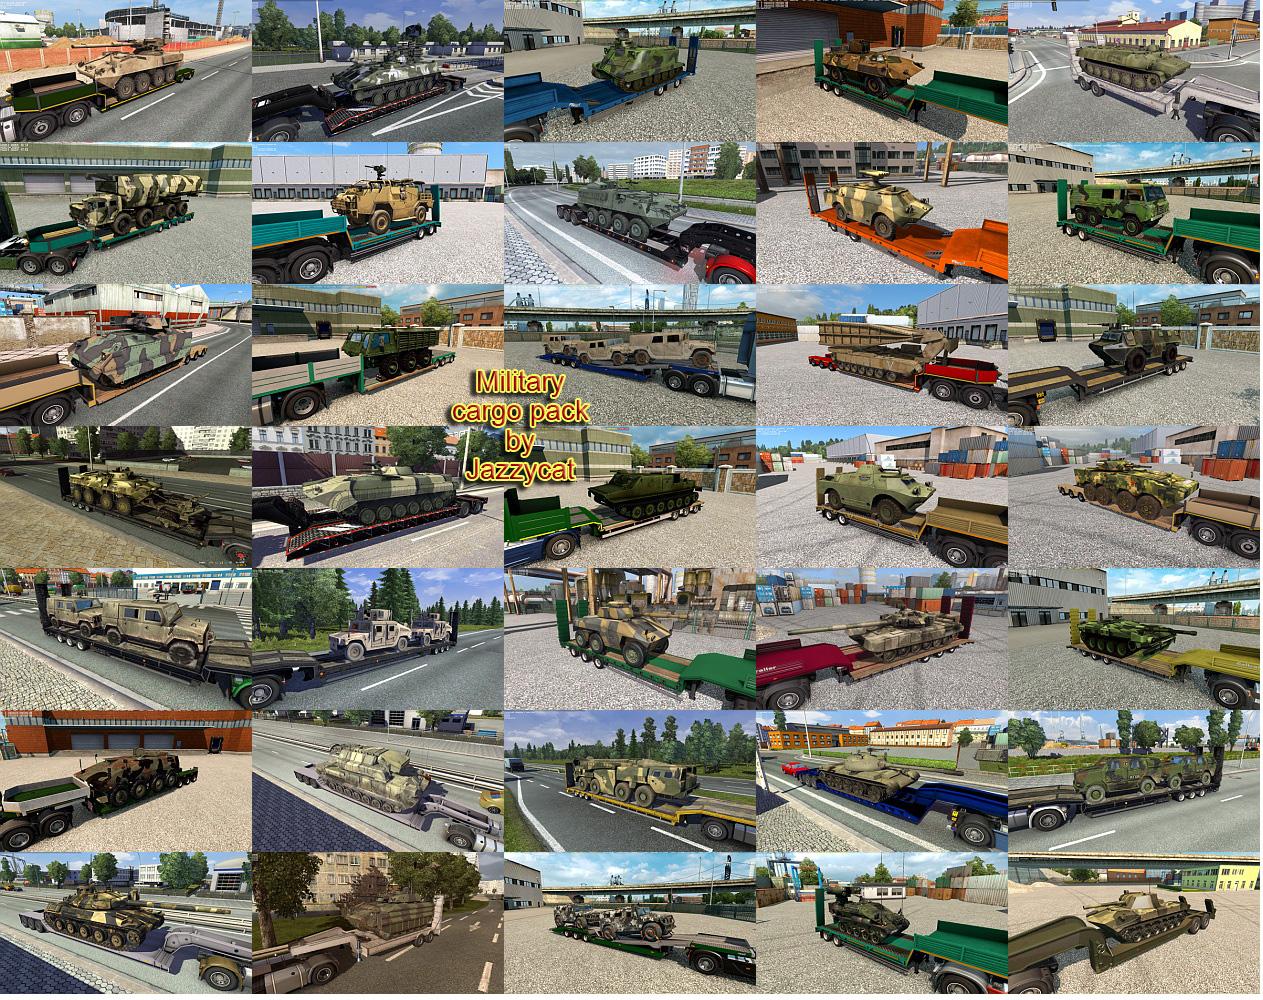 Military cargo pack by jazzycat V2.9.1 ETS2.